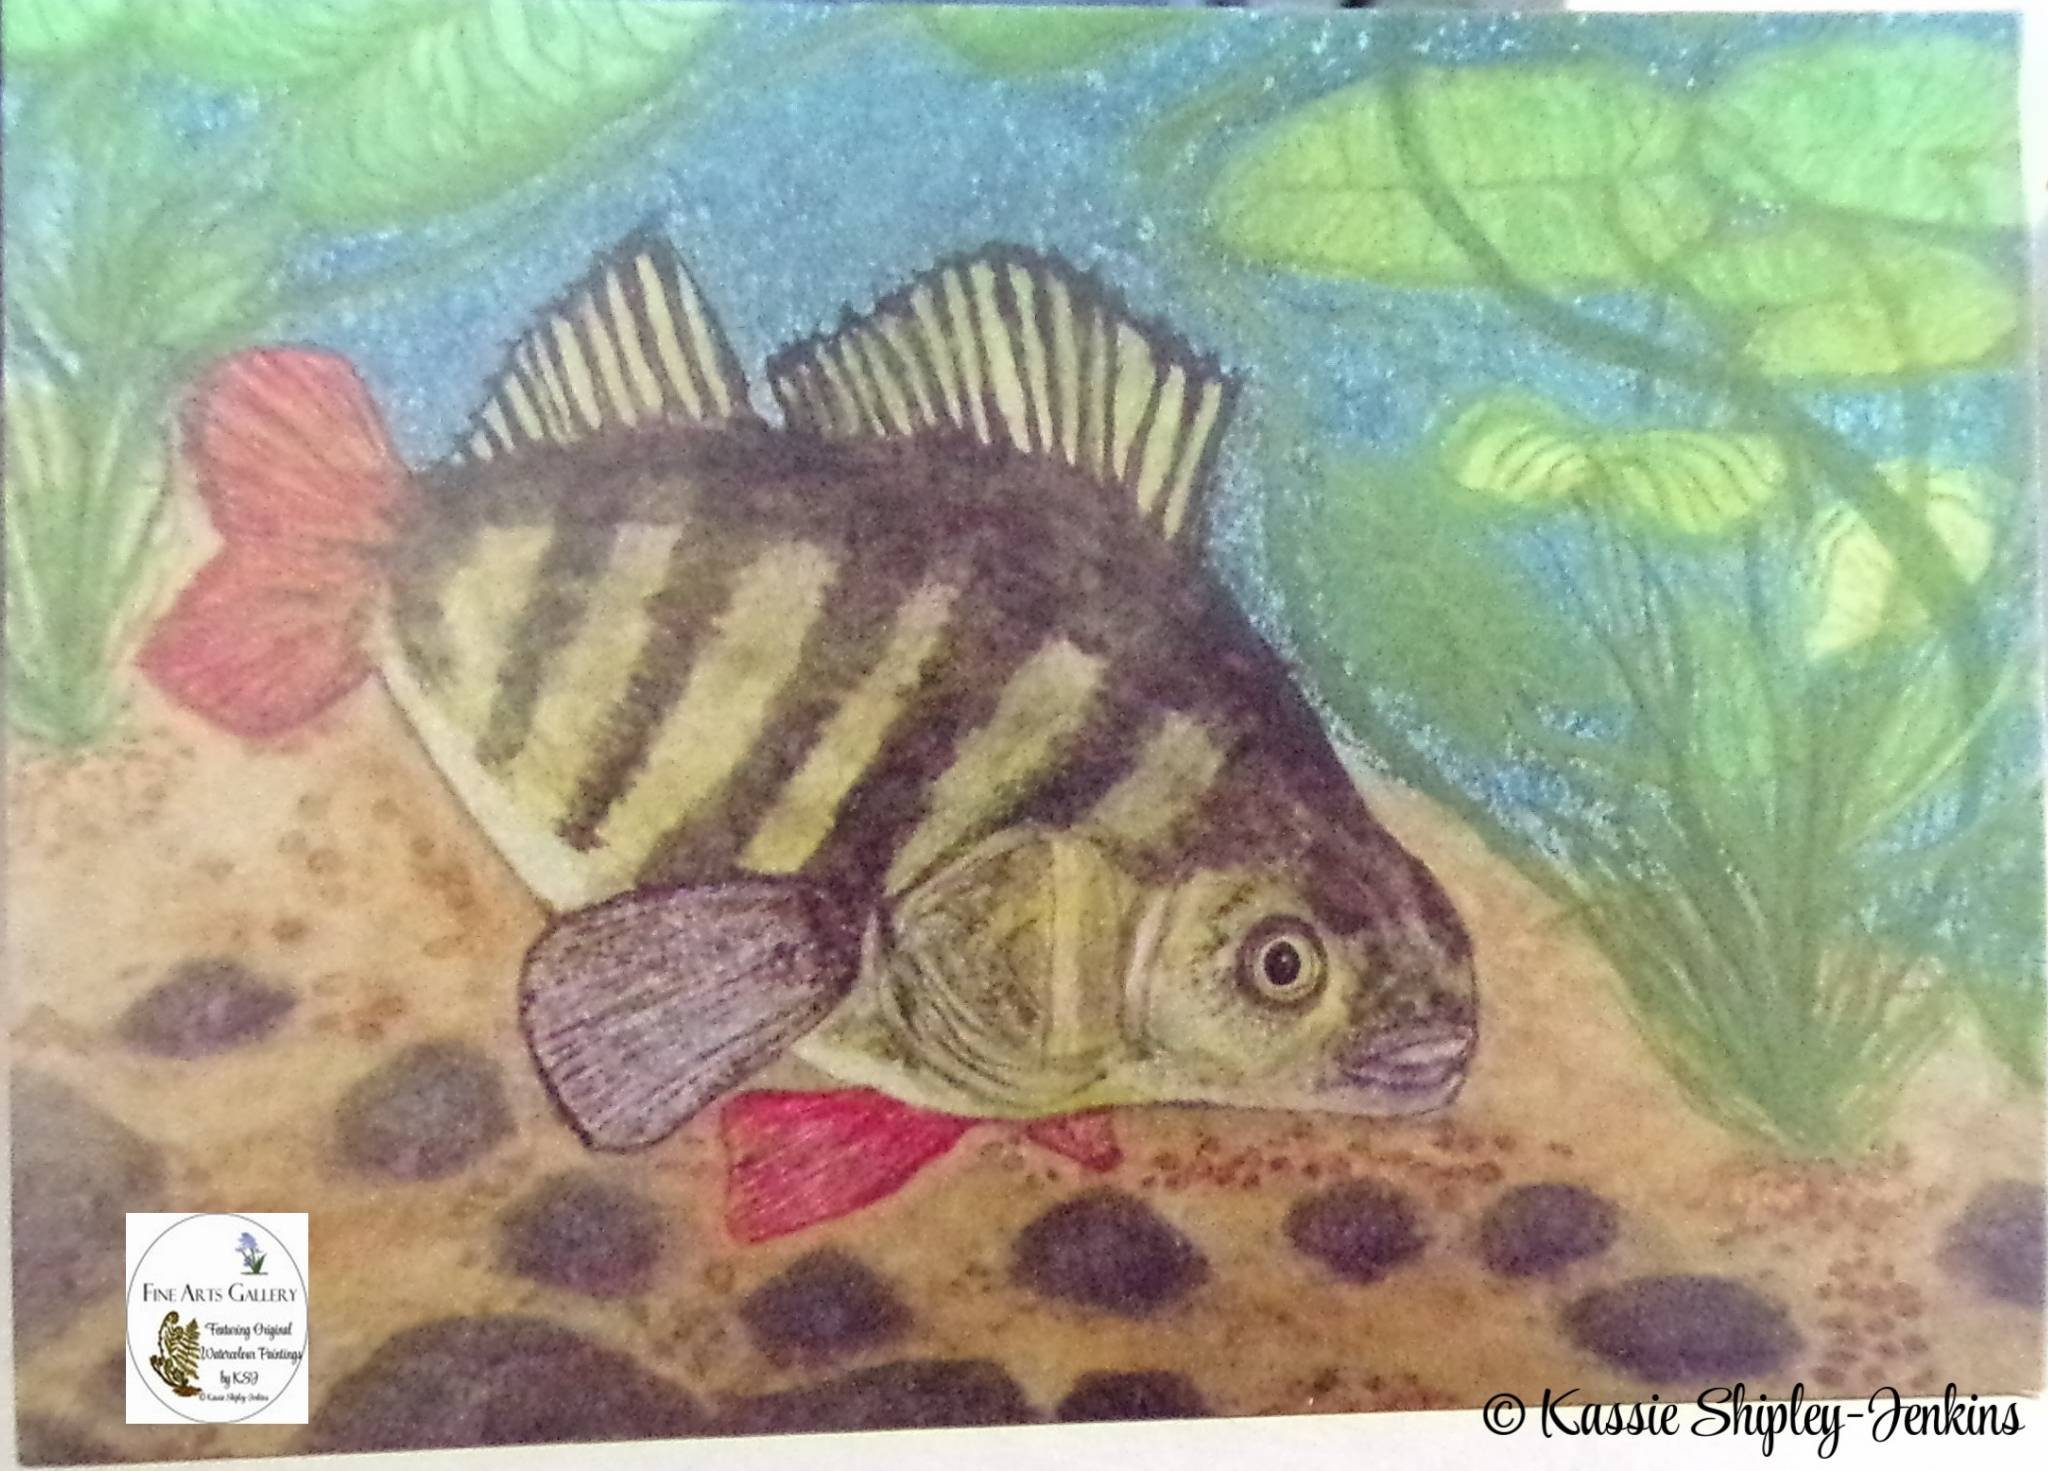 Perch Escaping Shoal Greetings Card